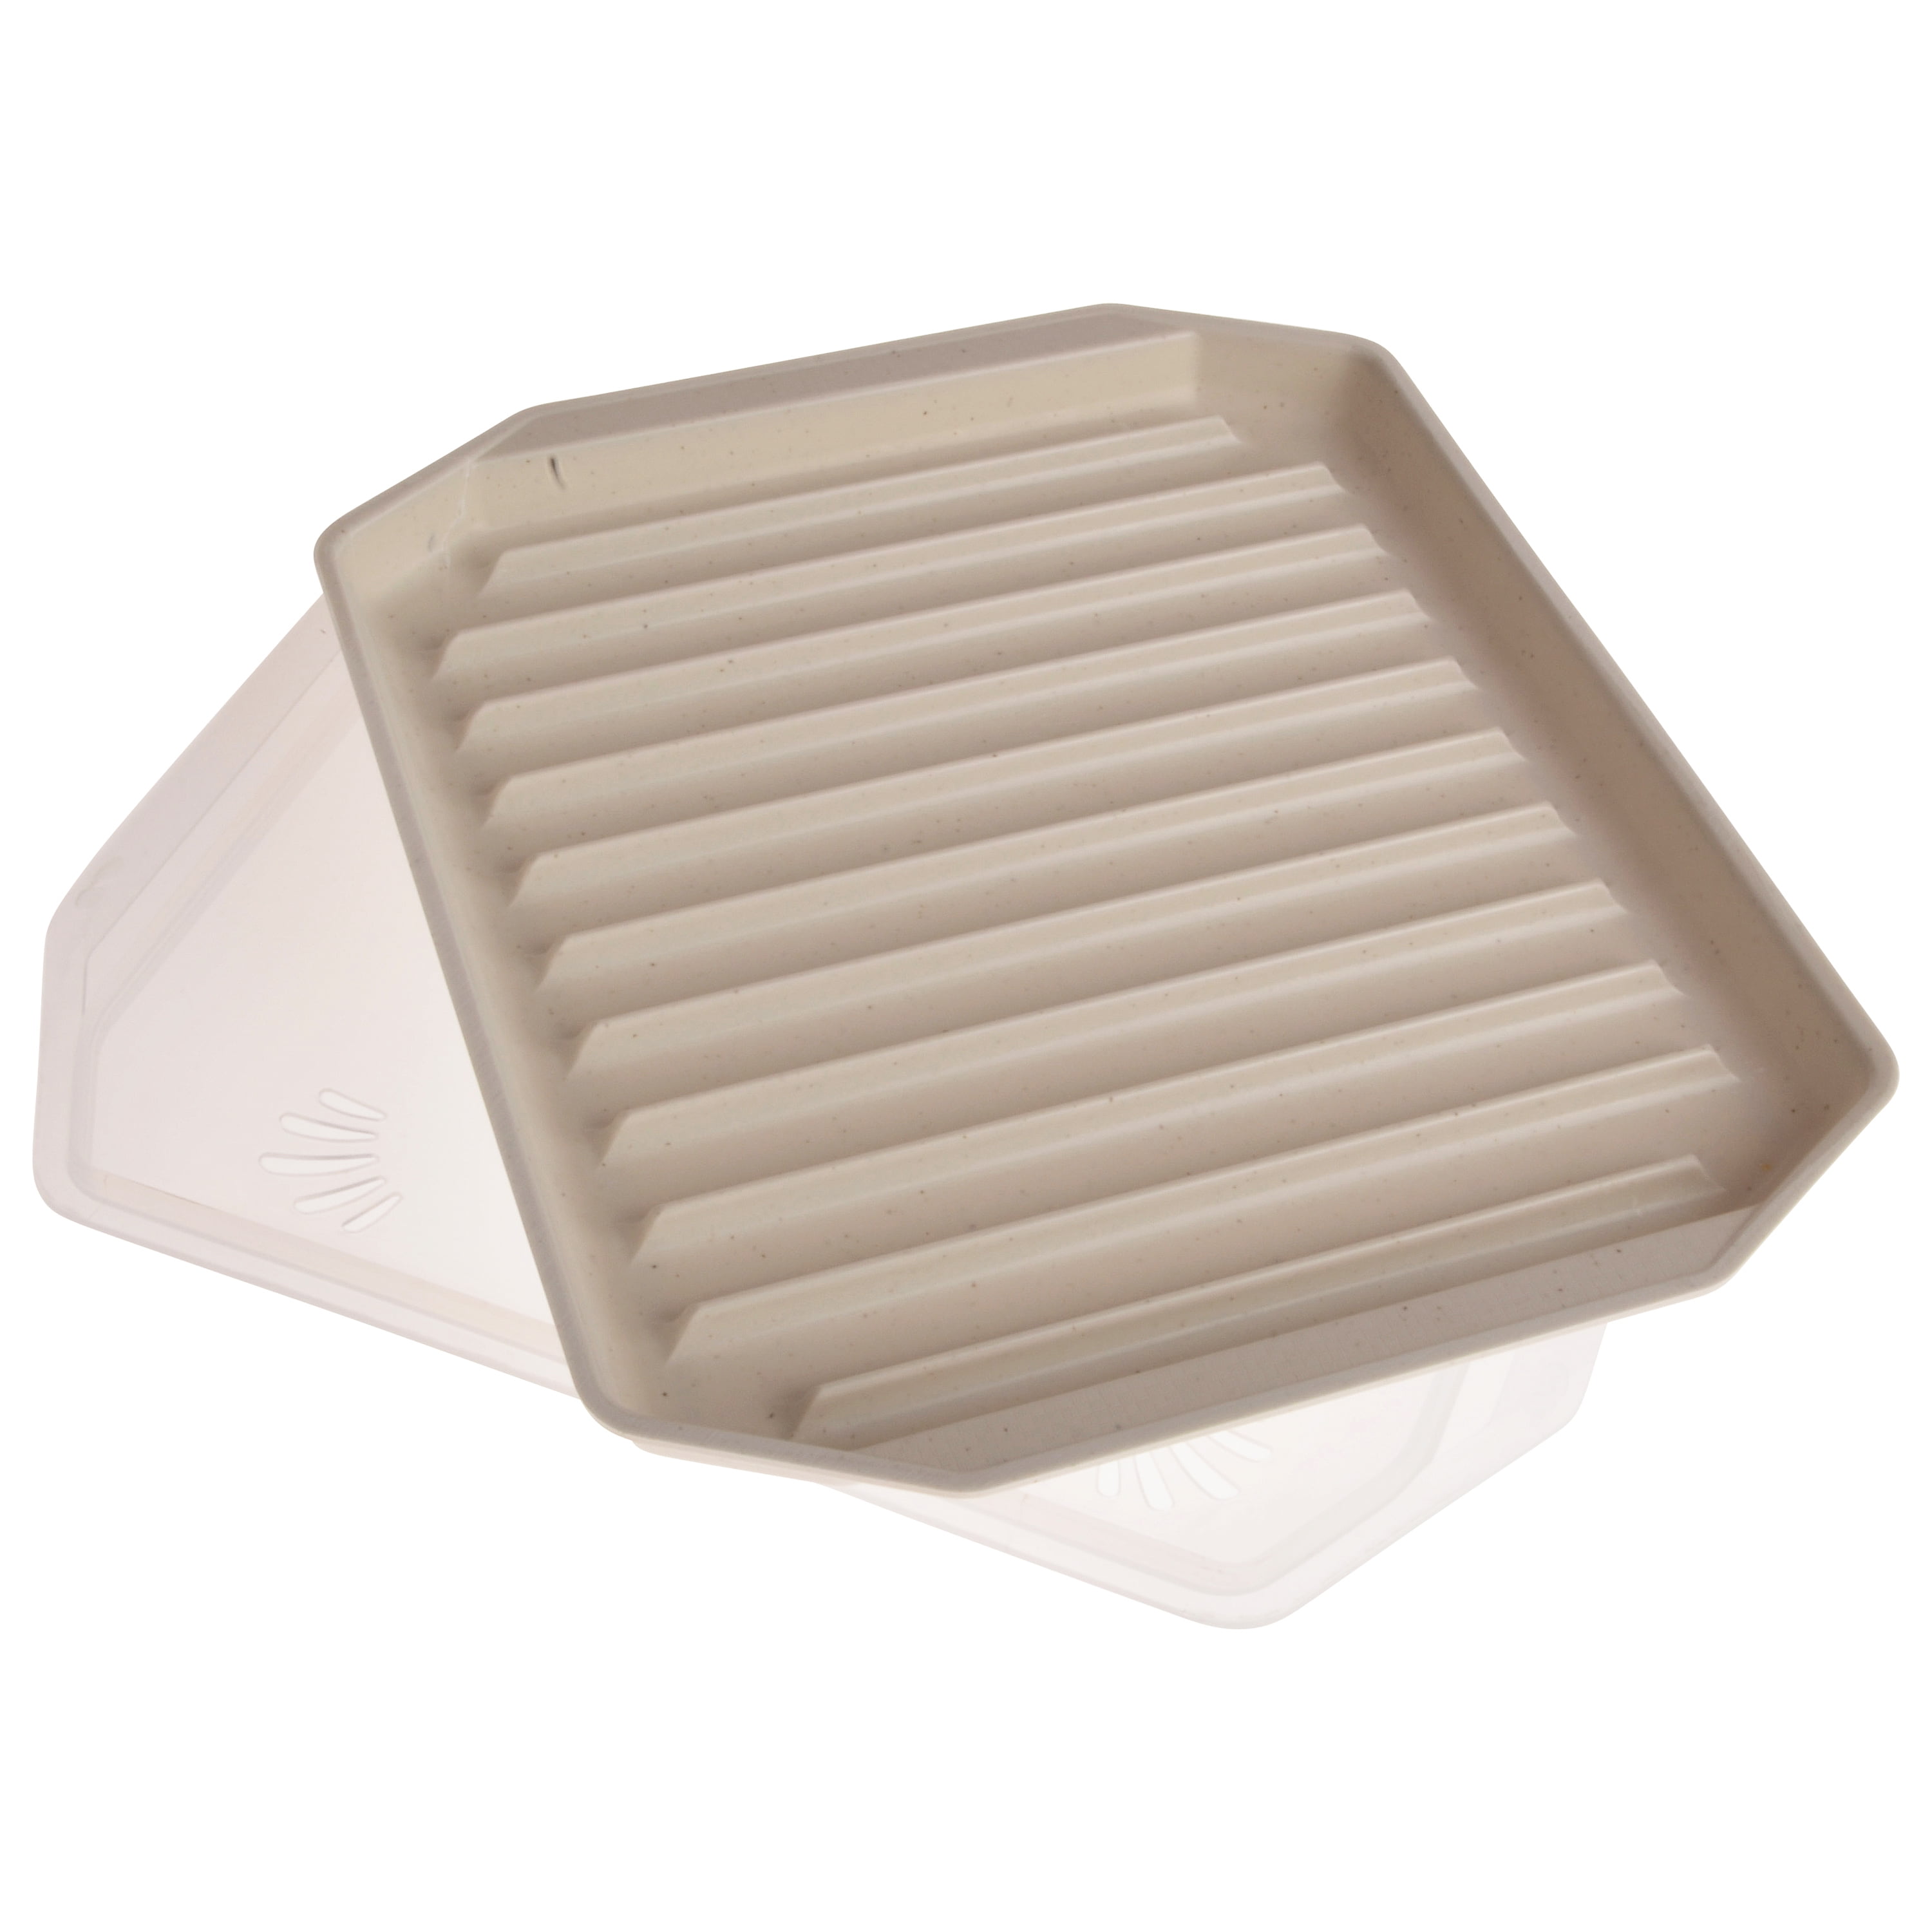 Nordic Ware® Microwave Slanted with Lid Bacon Tray, 1 - Kroger